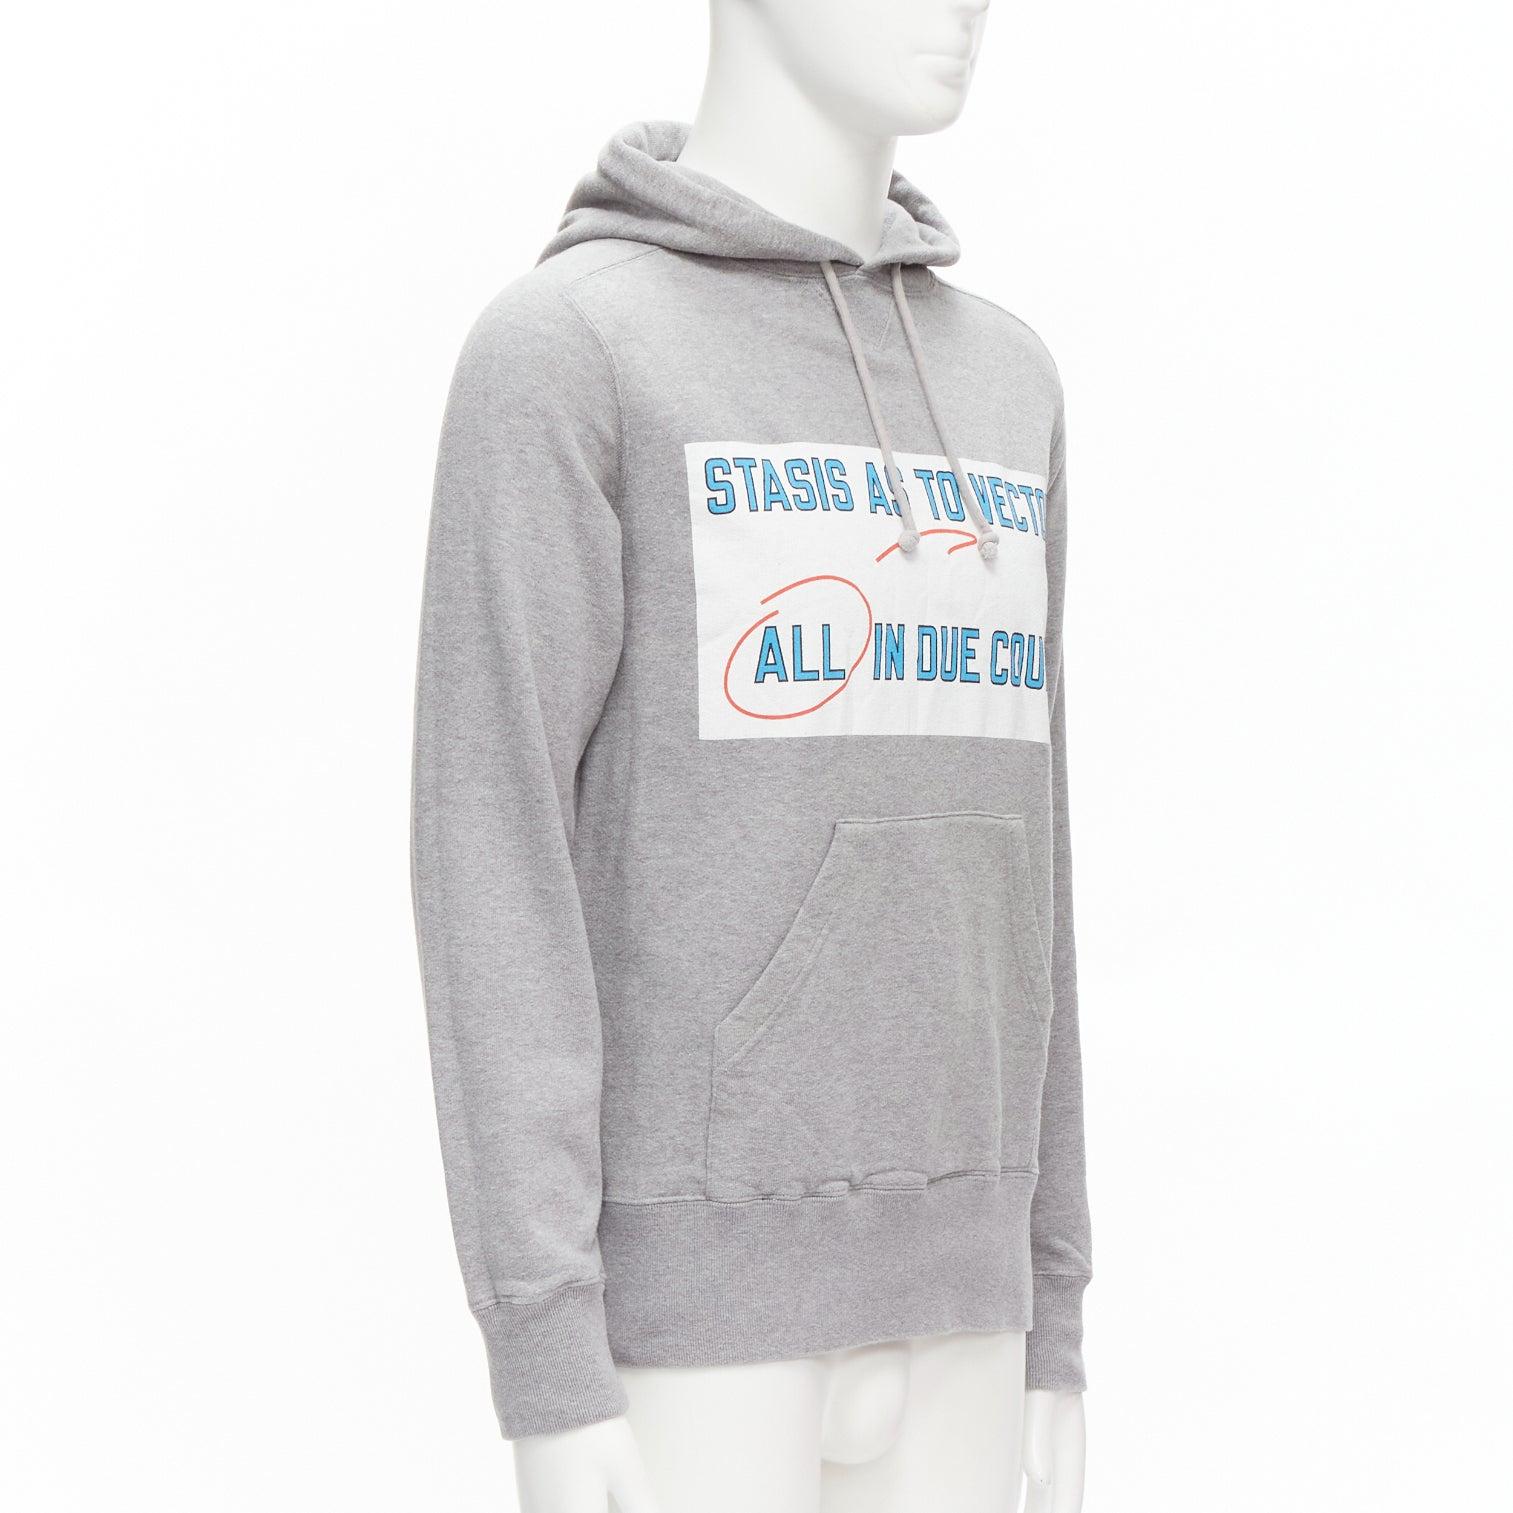 SACAI 2018 Stasis grey cotton slogan print hoodie sweatshirt JP1 S
Reference: YNWG/A00177
Brand: Sacai
Designer: Chitose Abe
Collection: 2018
Material: Cotton
Color: Grey, White
Pattern: Abstract
Closure: Pullover
Extra Details: 